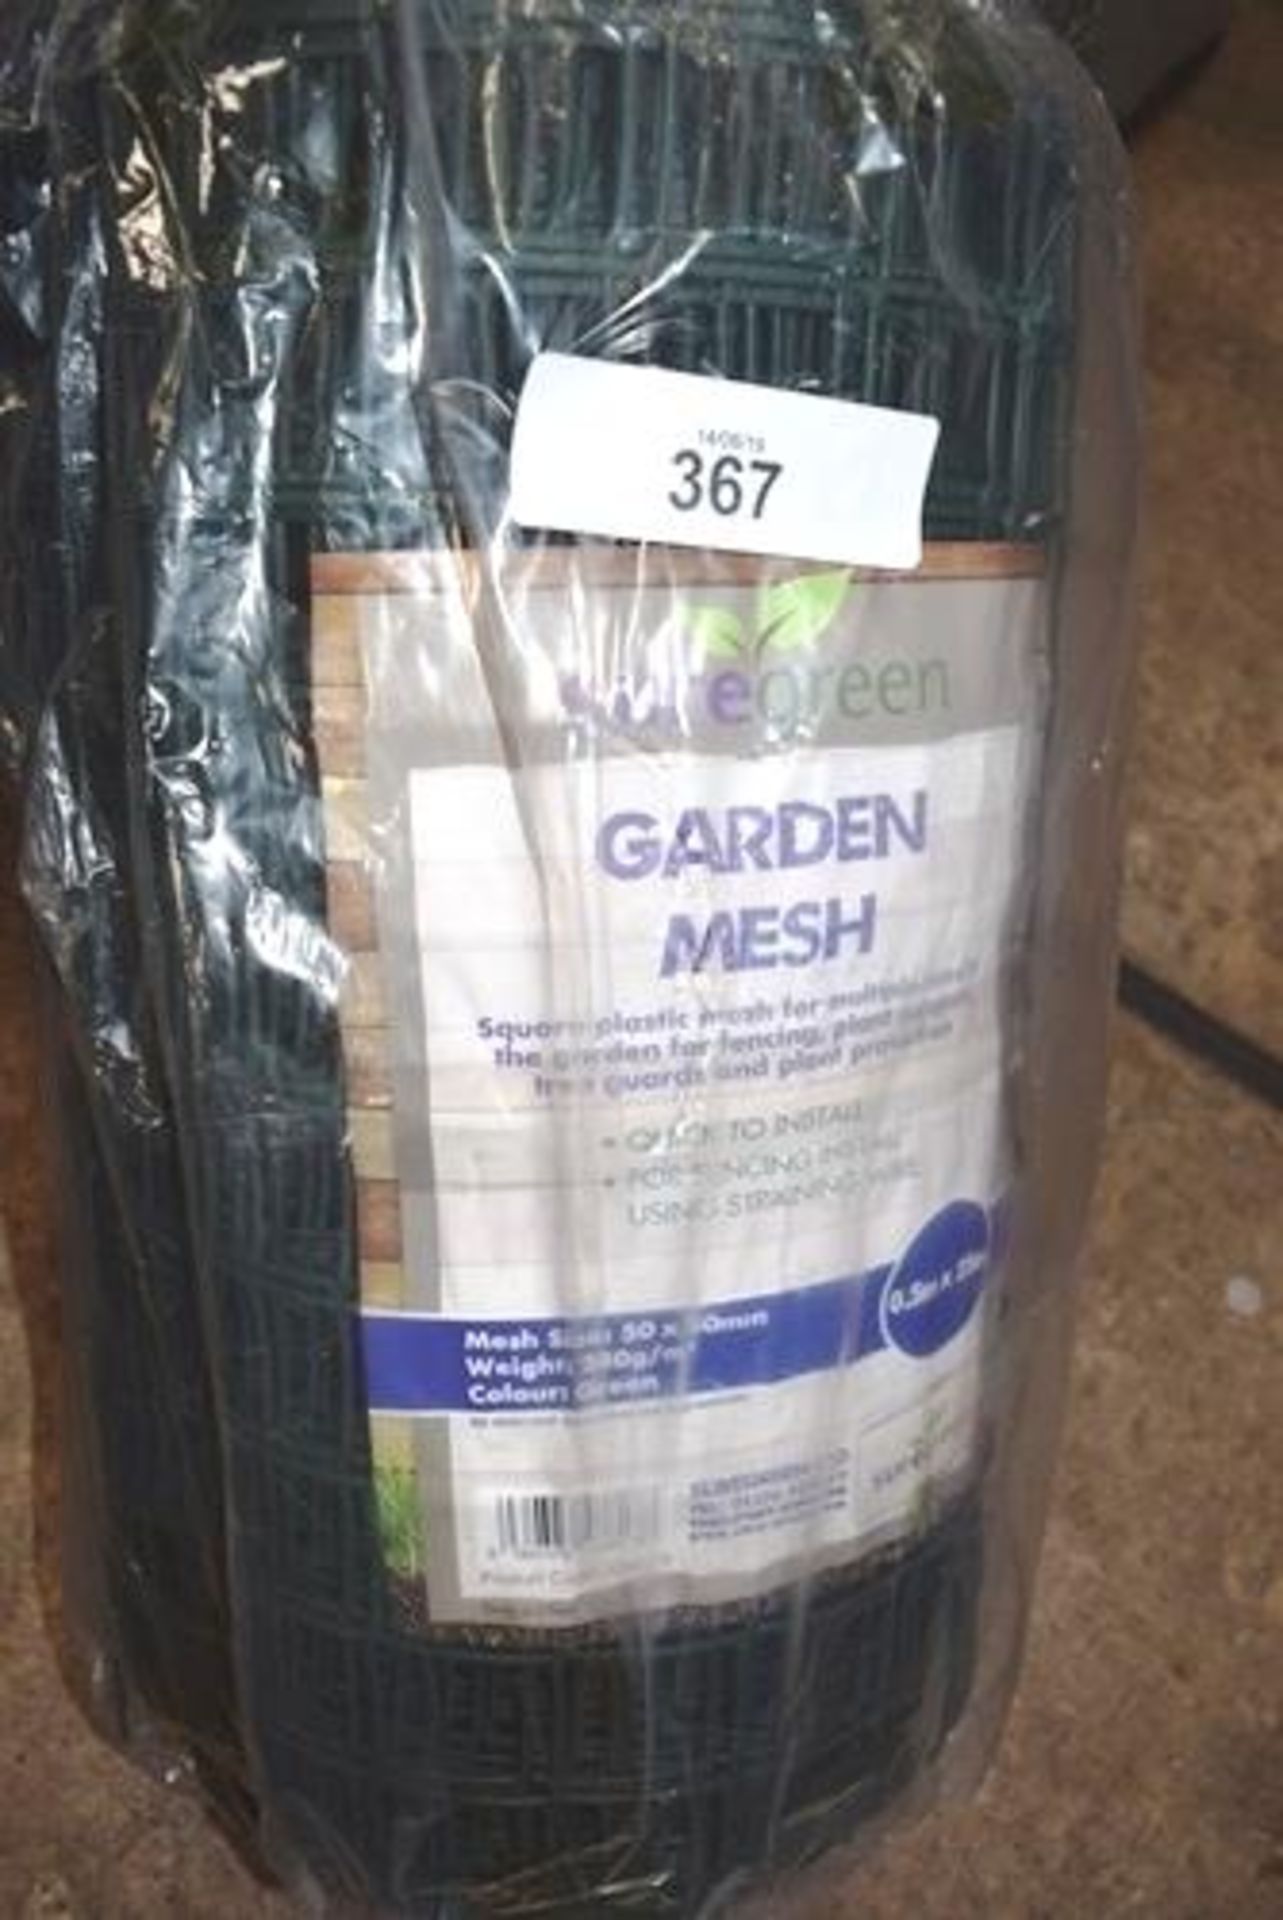 1 x length of Suregreen garden mesh, size 0.5m x 25m, together with 2 x lengths of green temporary